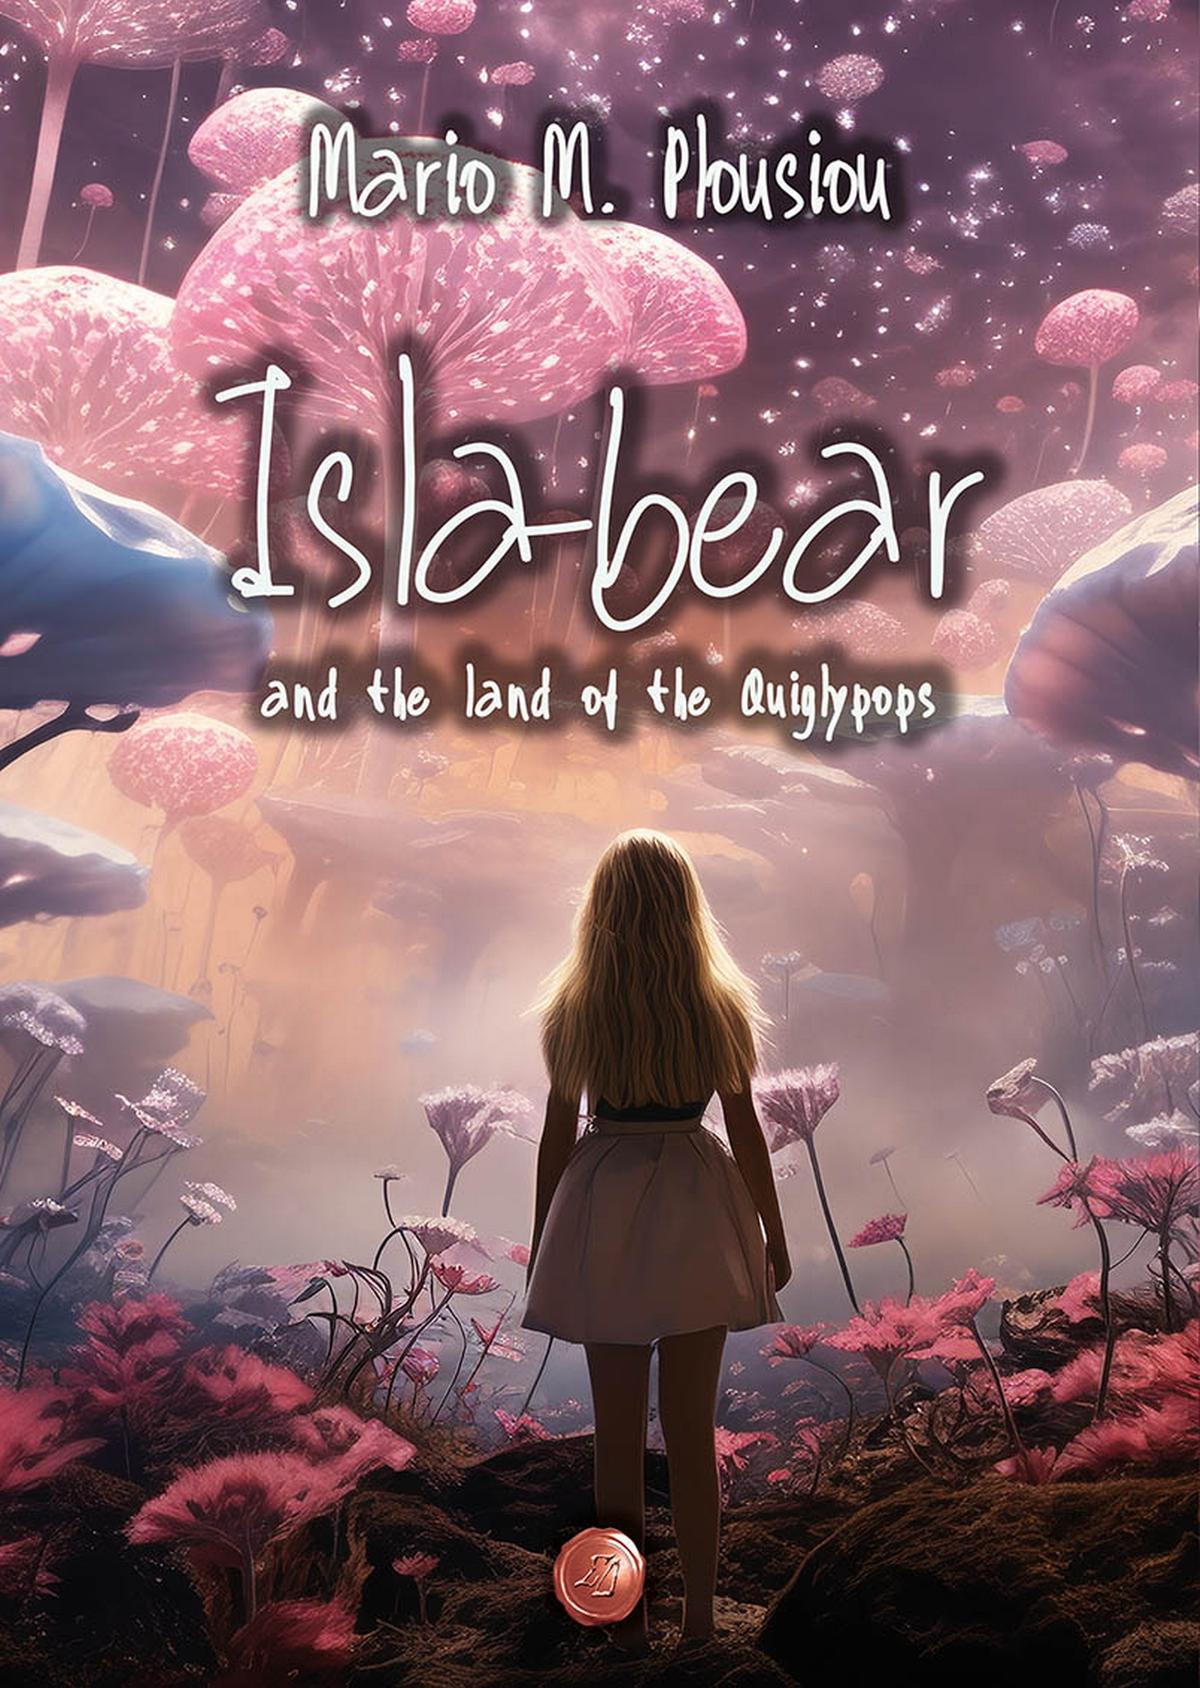 Isla-bear and the land of the Quiglypops